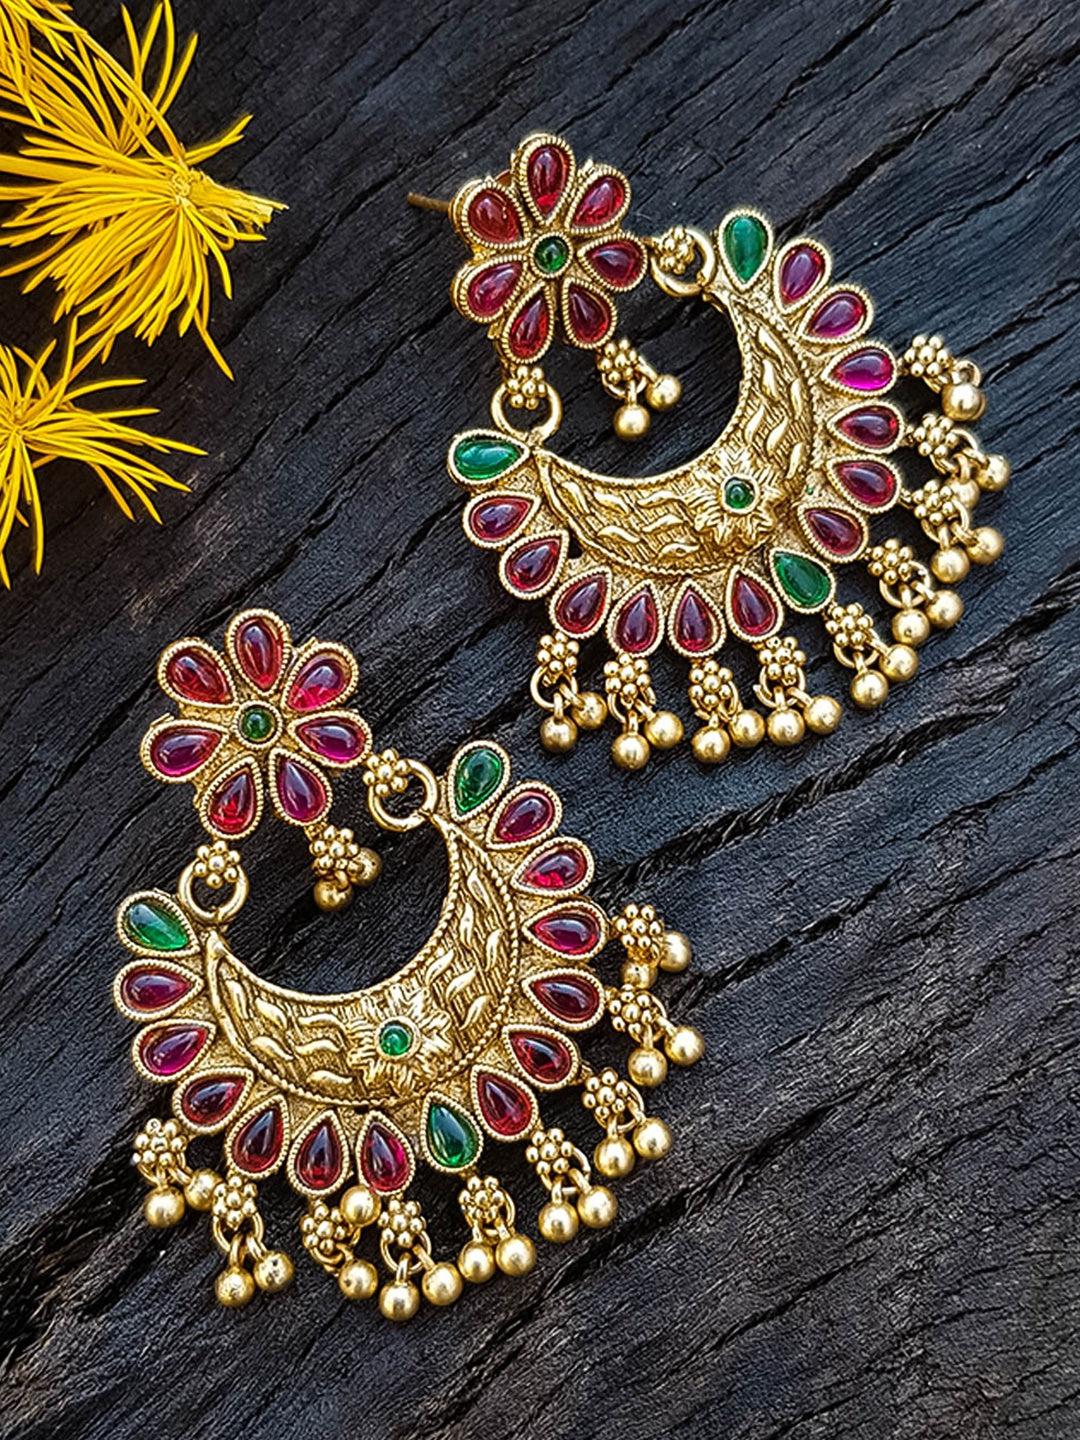 Gold Plated Chandbali hangings / Earrings with AD Stones 13299N-1